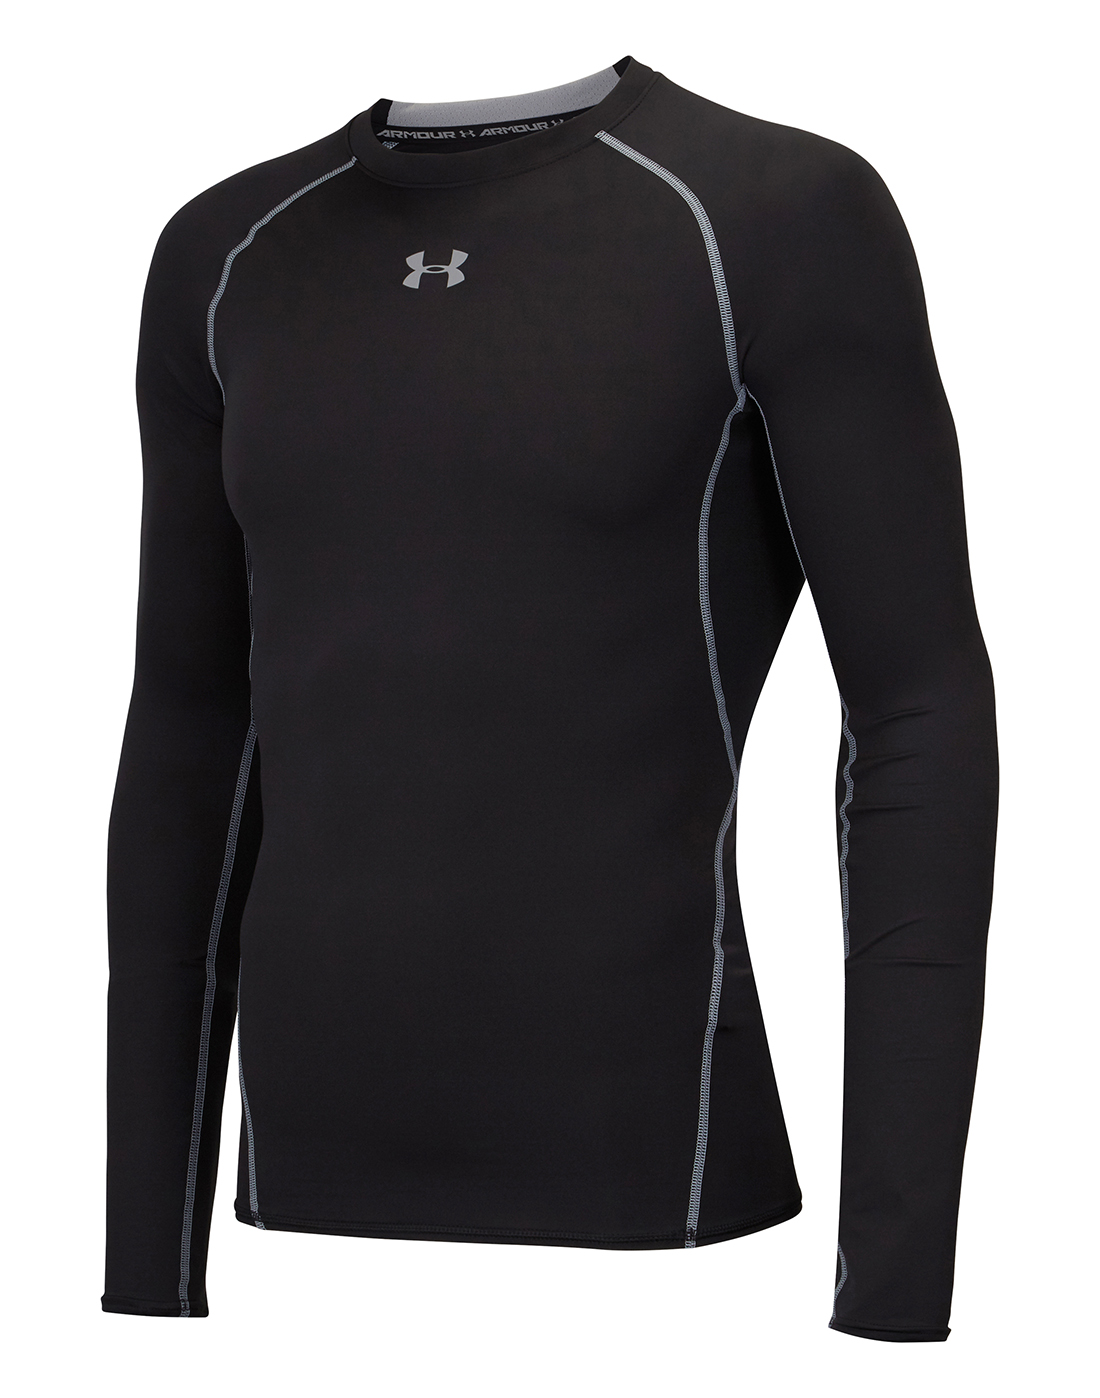 Men's Black Under Armour Long Sleeve Base Layer | Life Style Sports